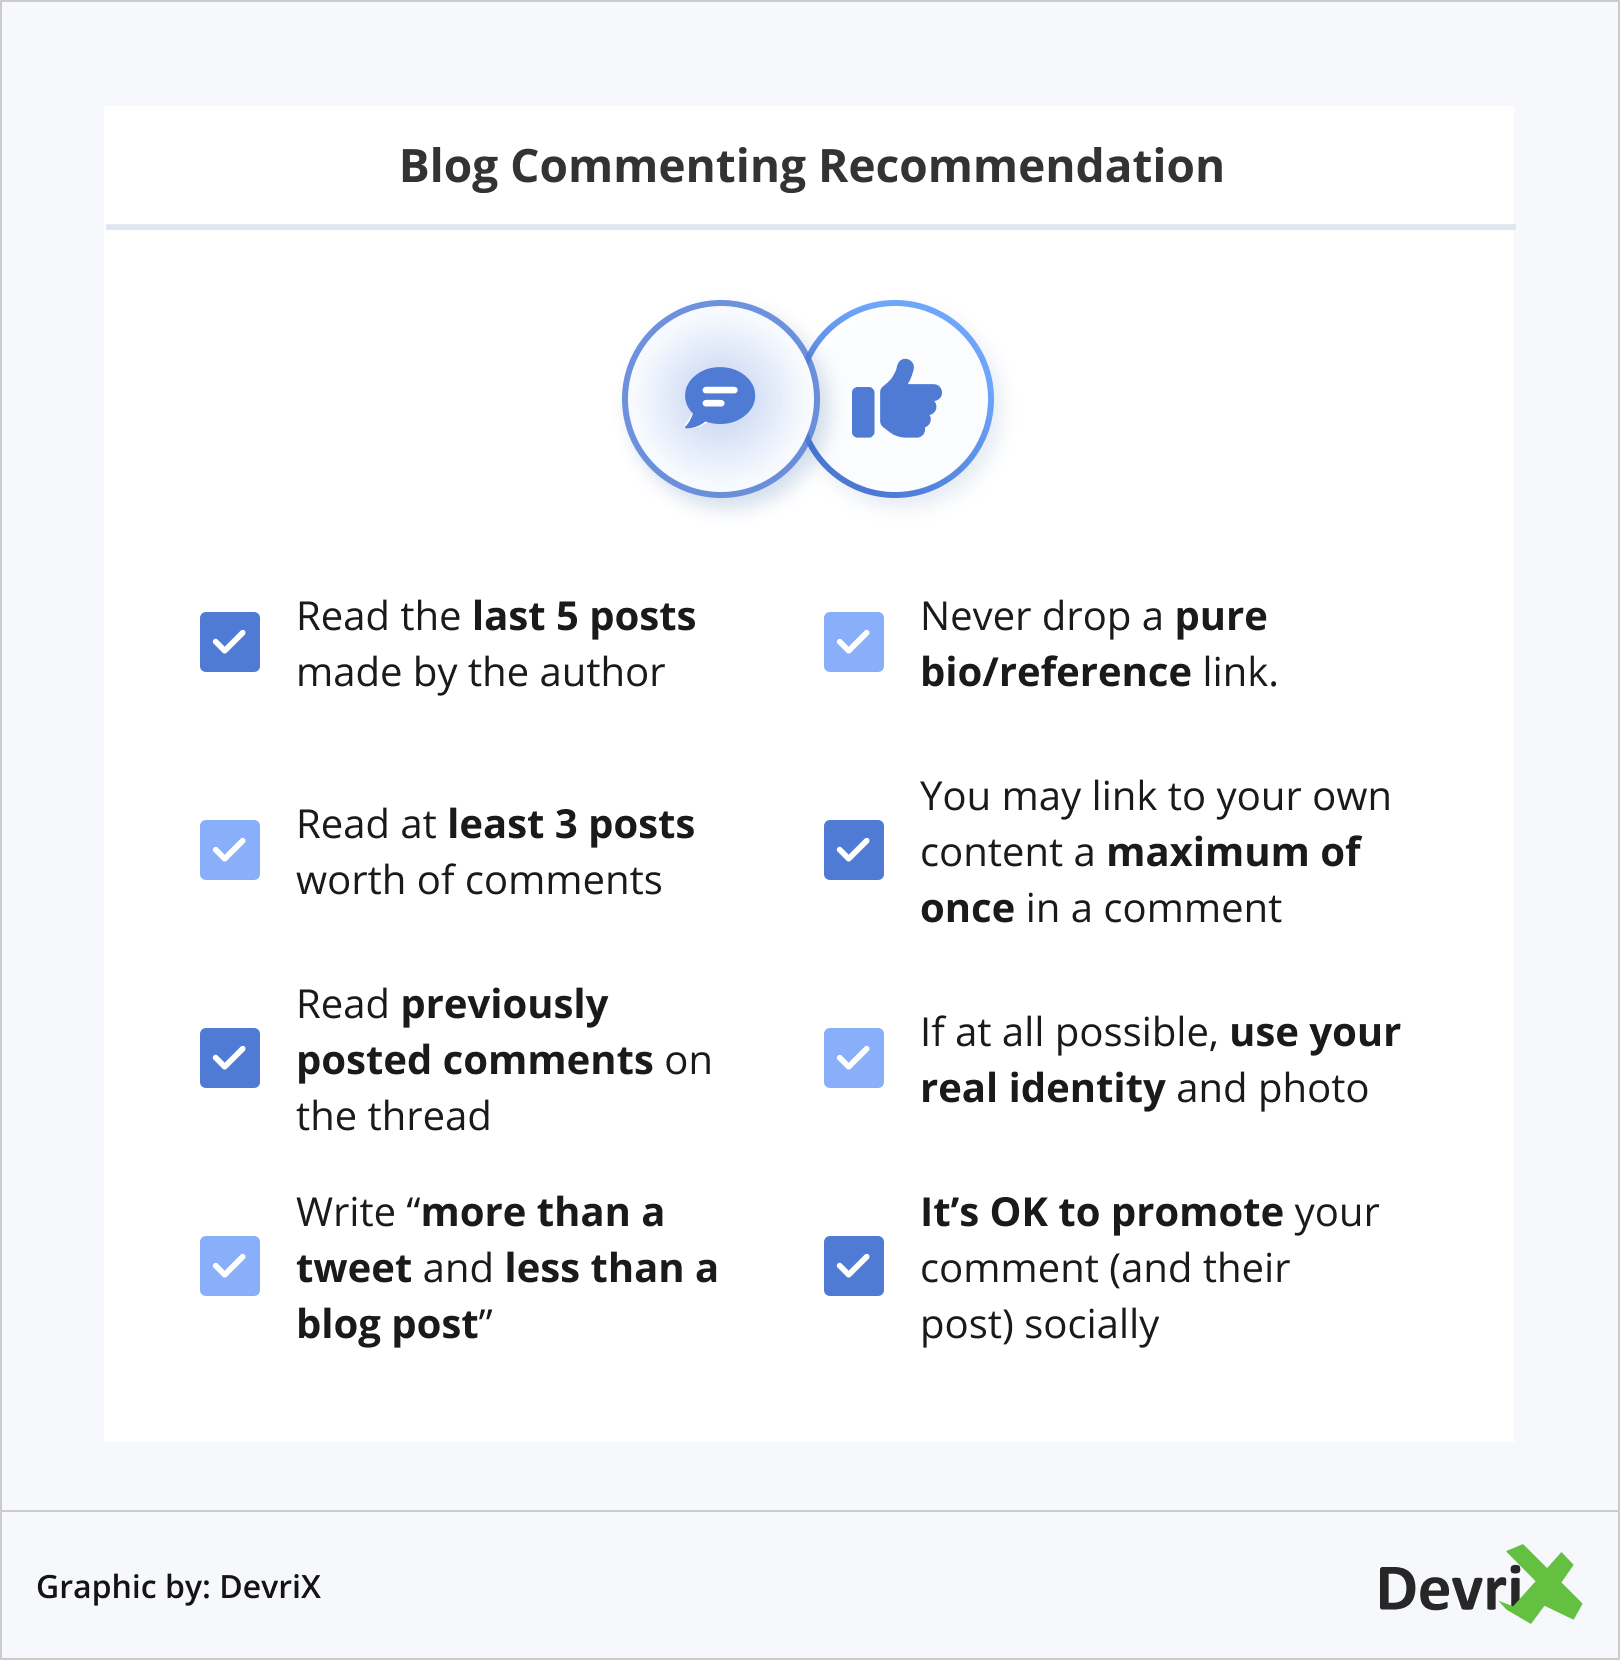 Blog Commenting Recommendation